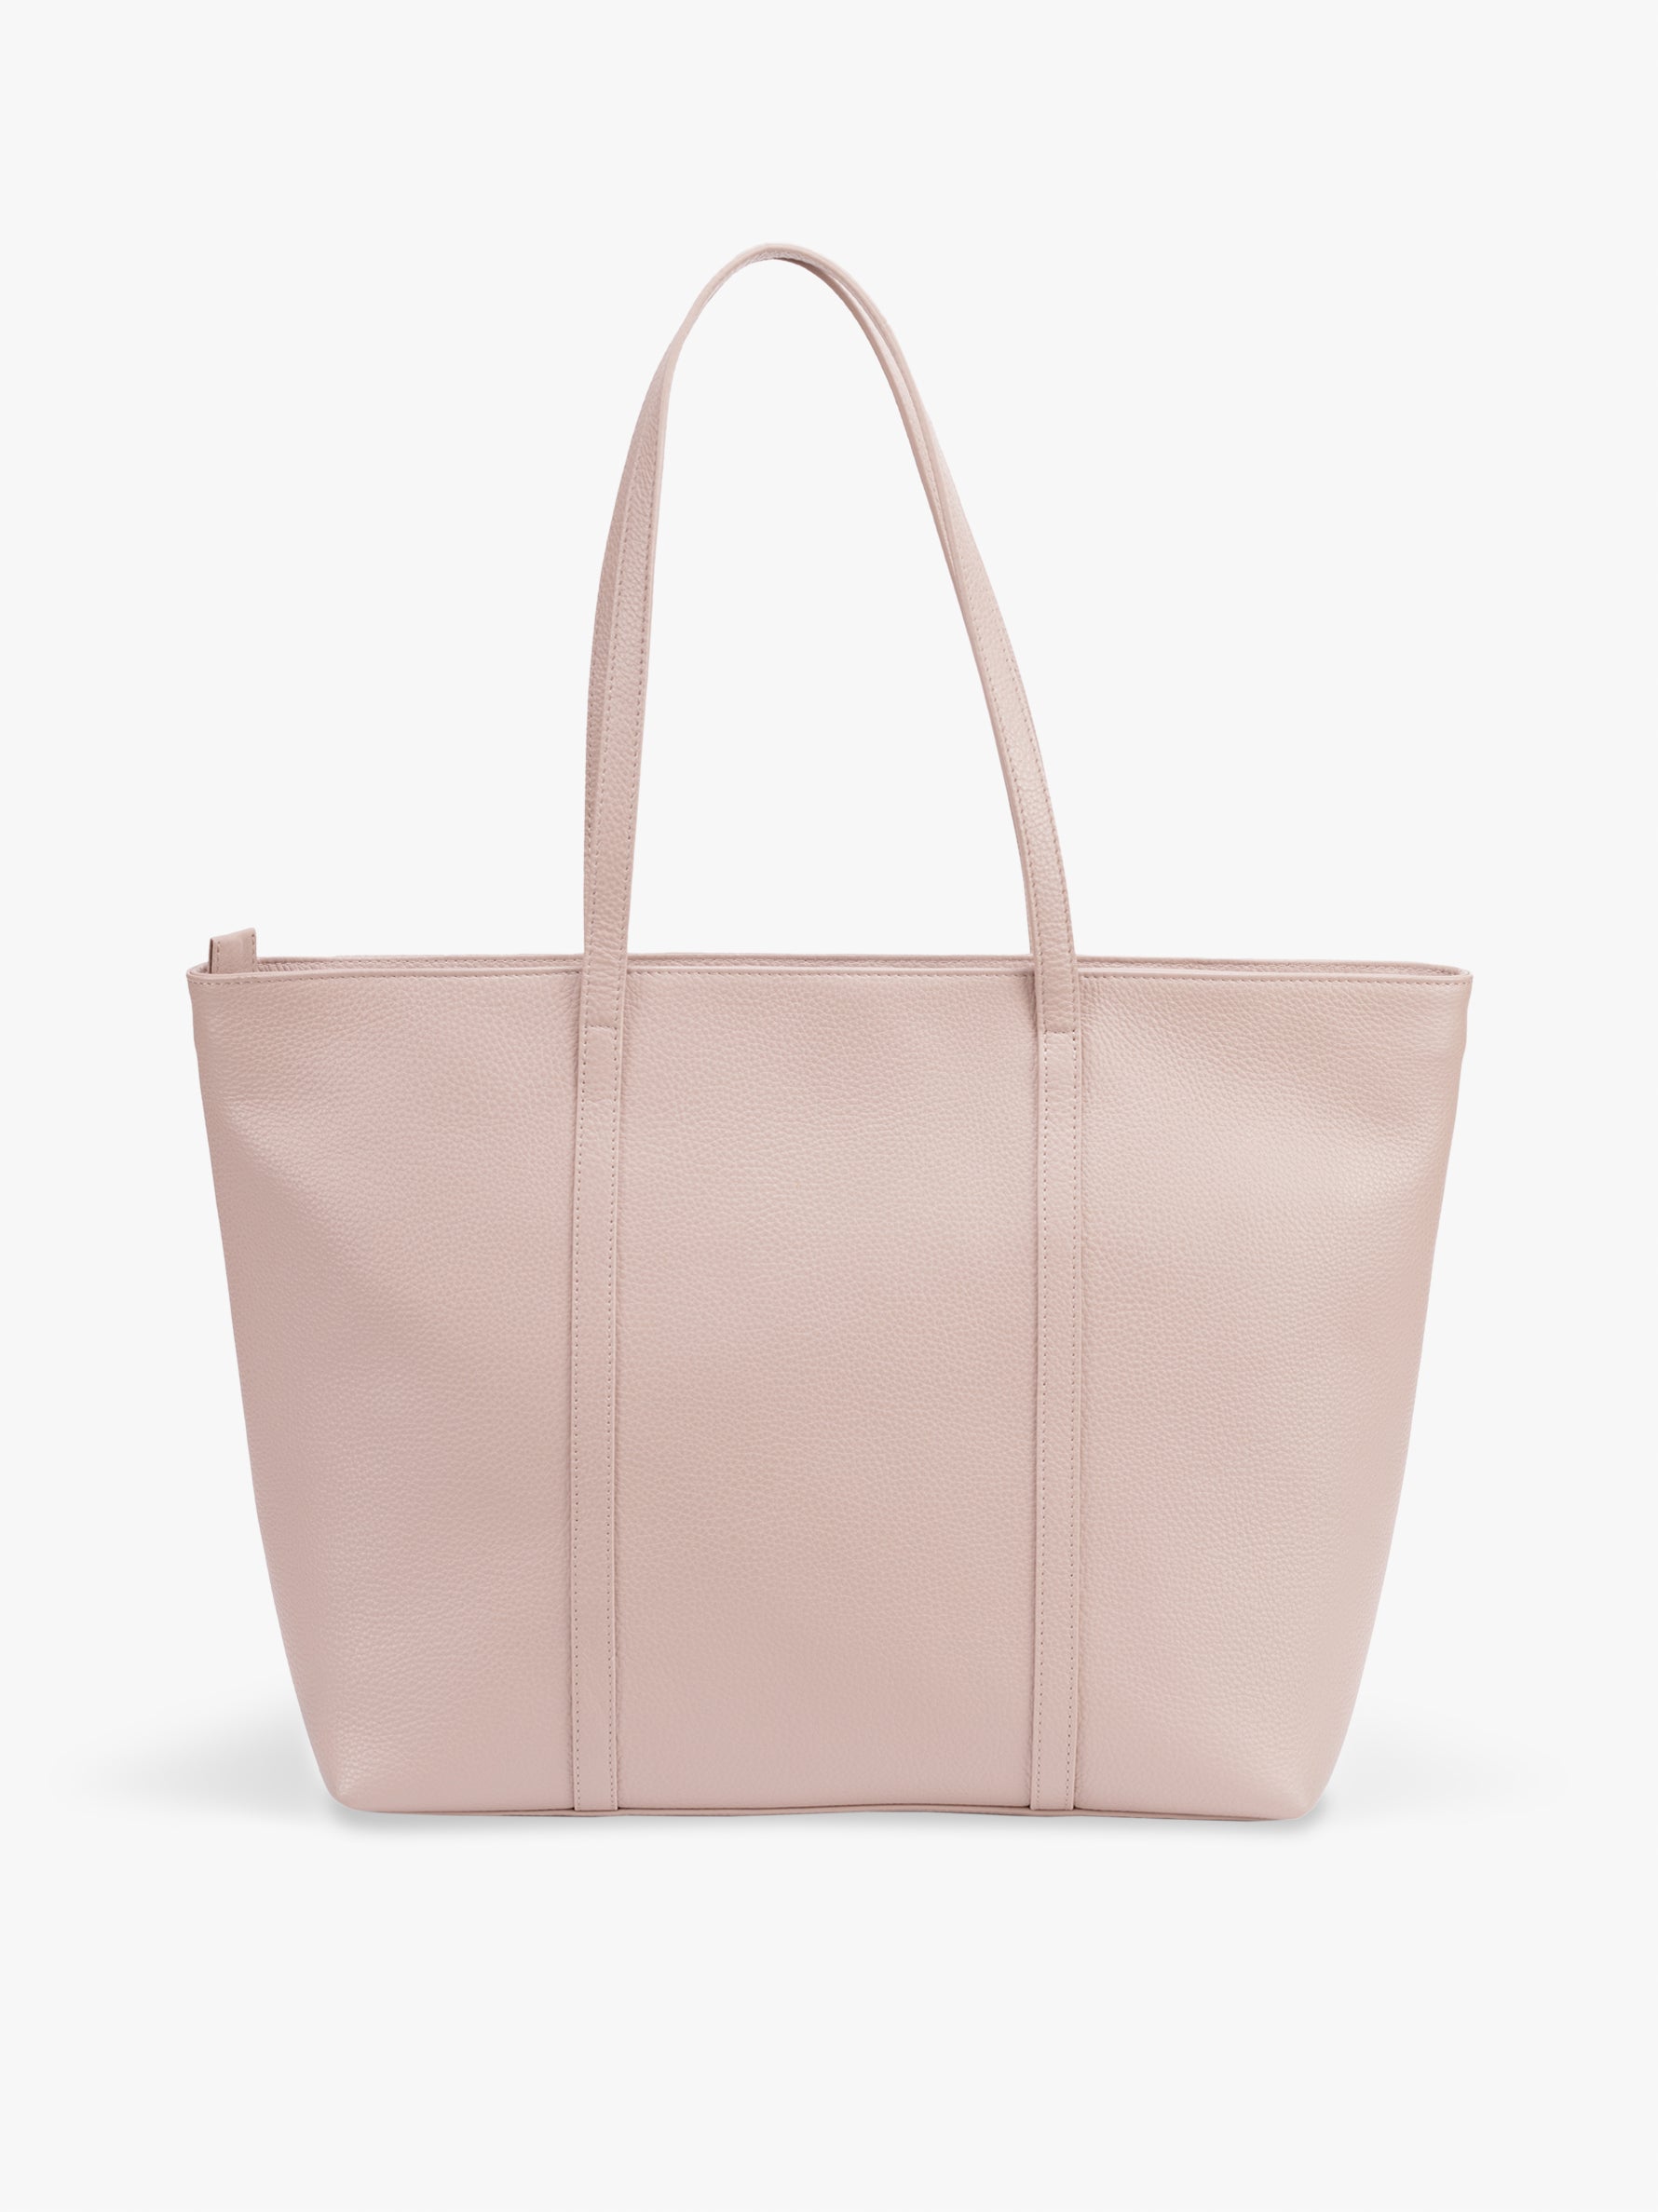 Handcrafted genuine leather 365 days tote bag for women Nude Pink